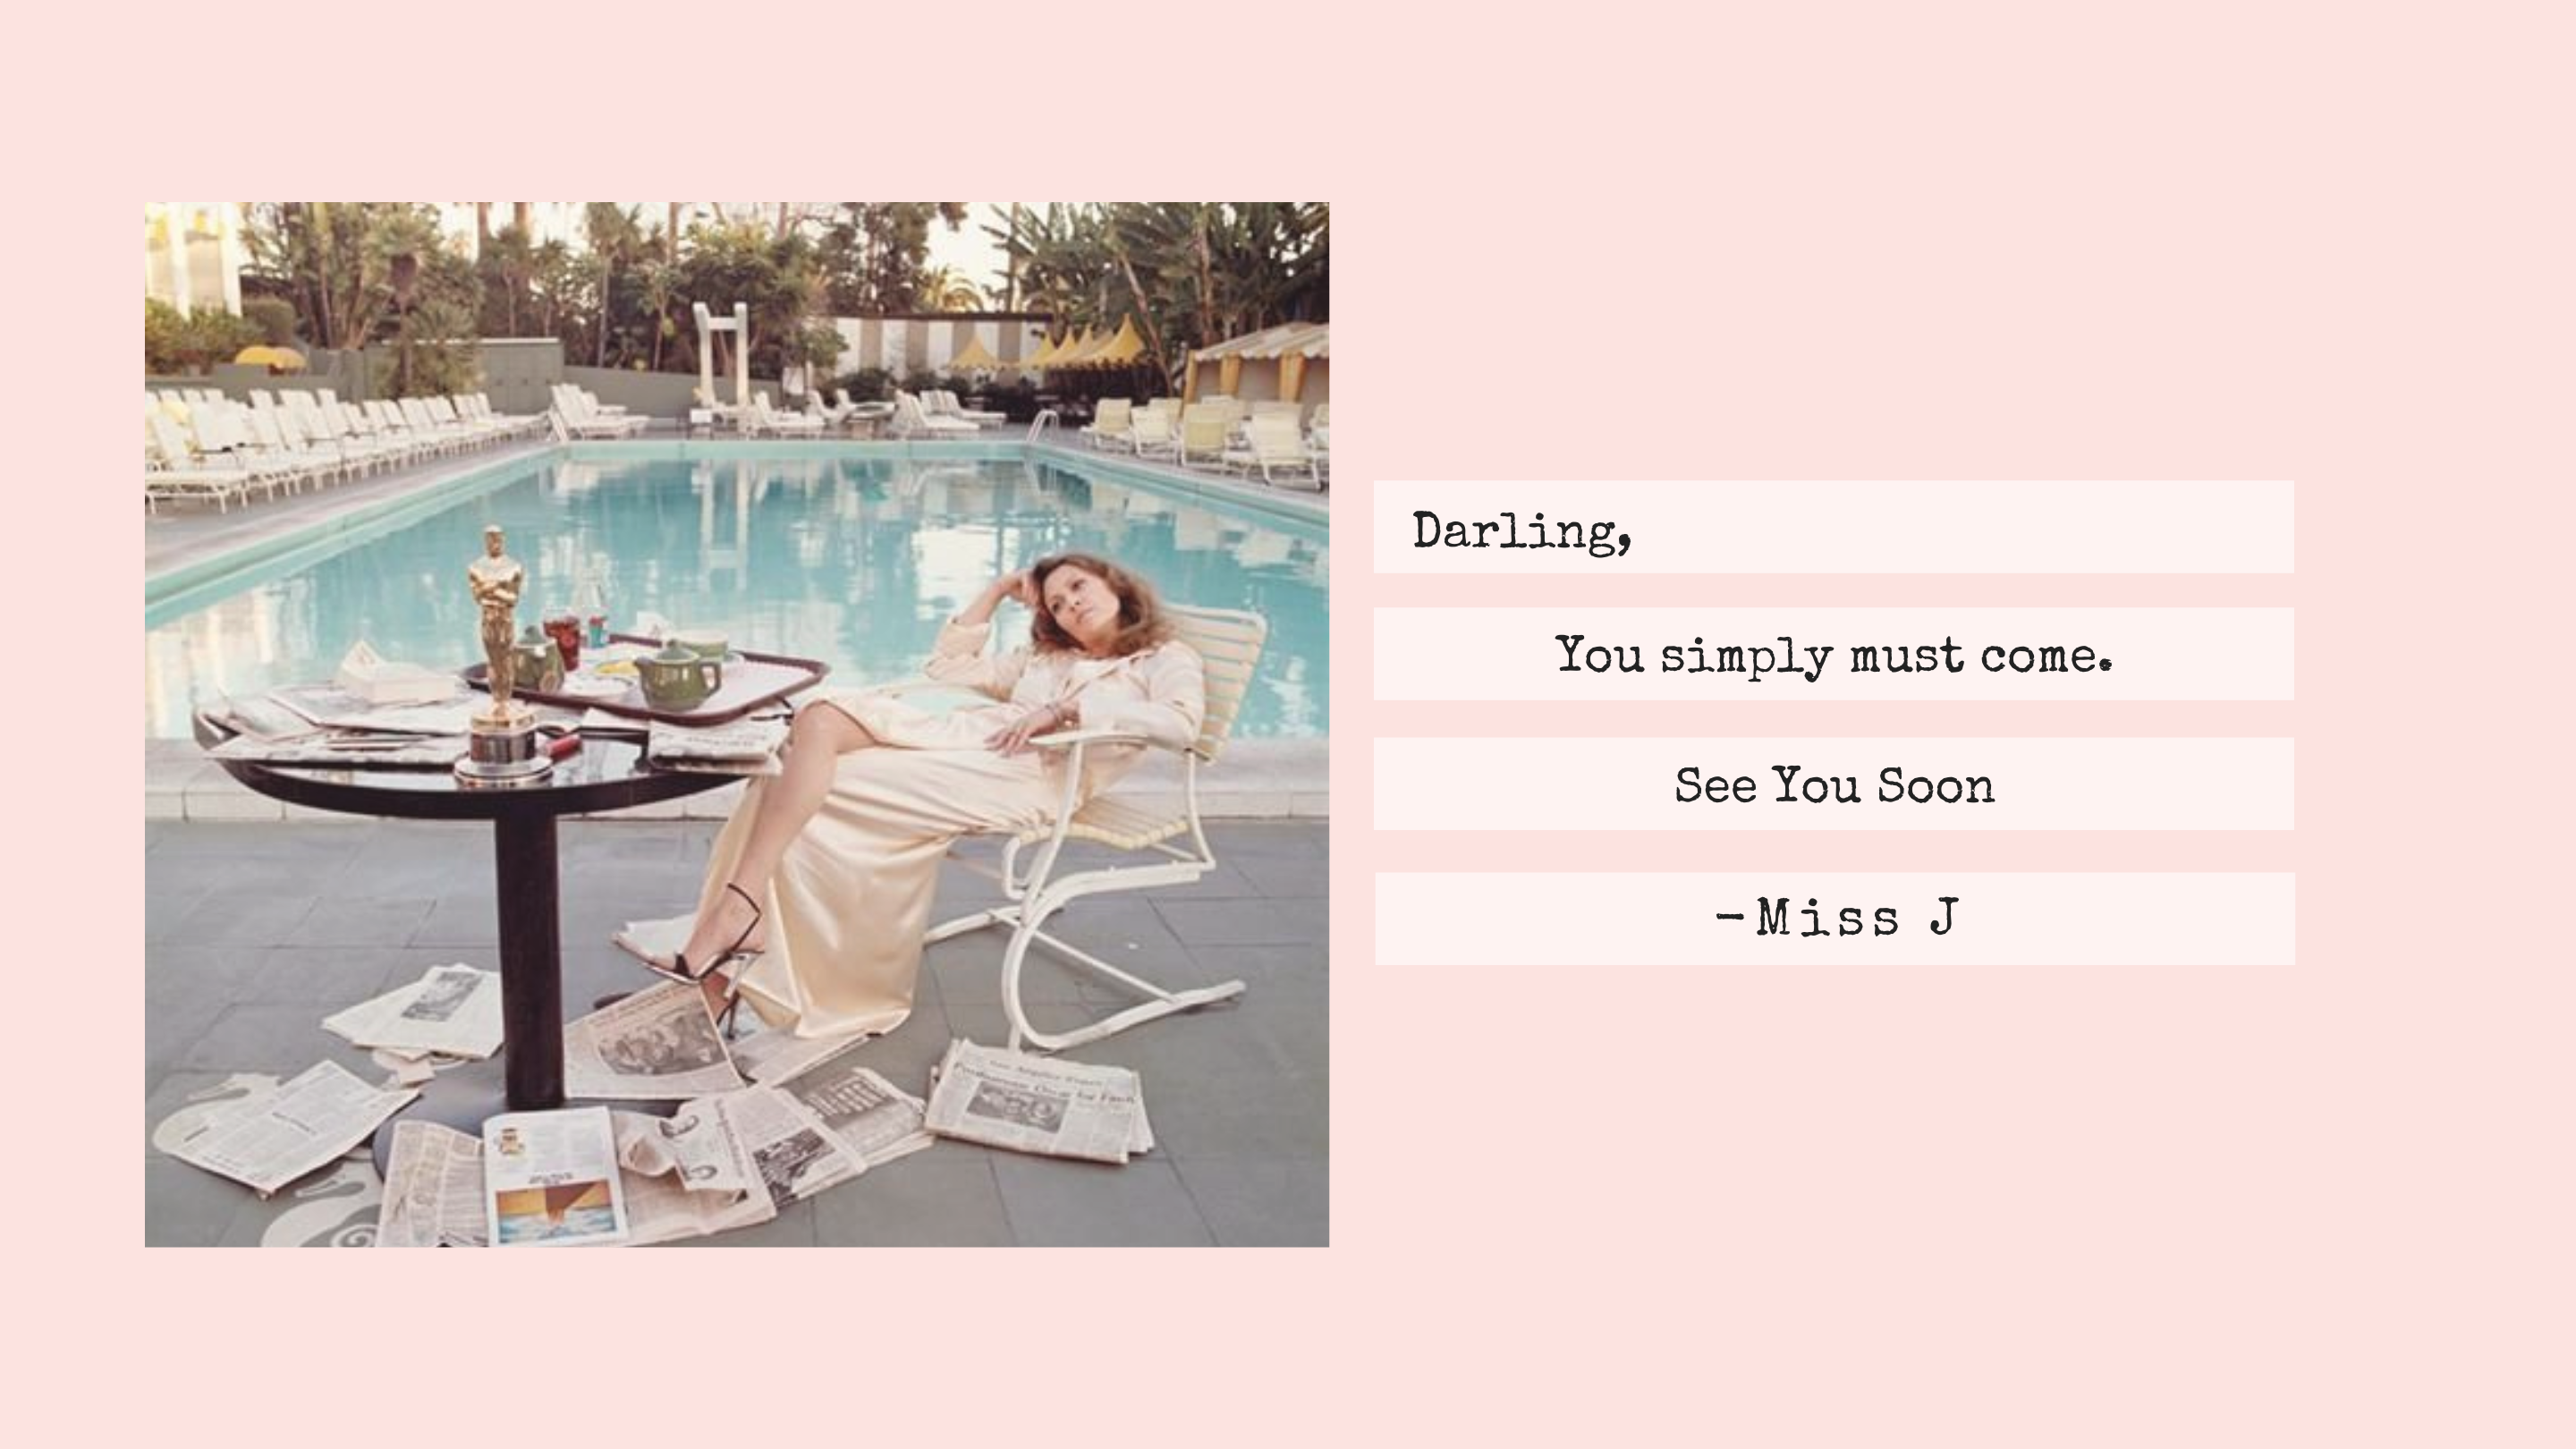 Darling, You simply must come. - Miss J